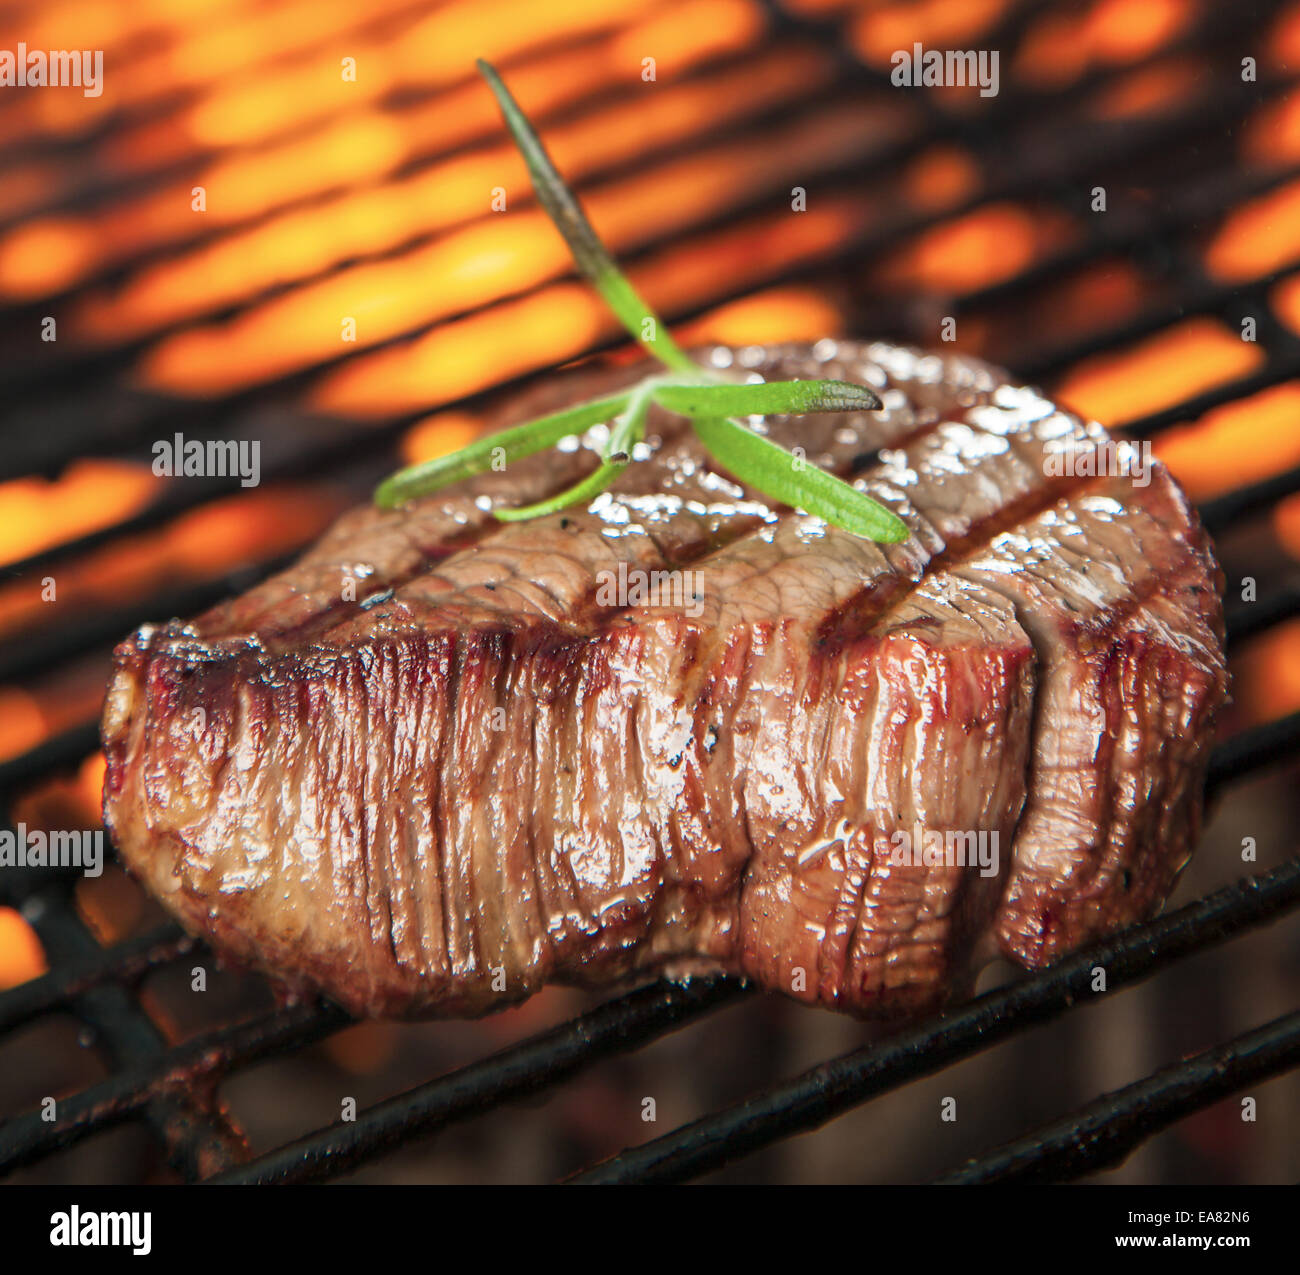 Delicious beef steak on grill Stock Photo